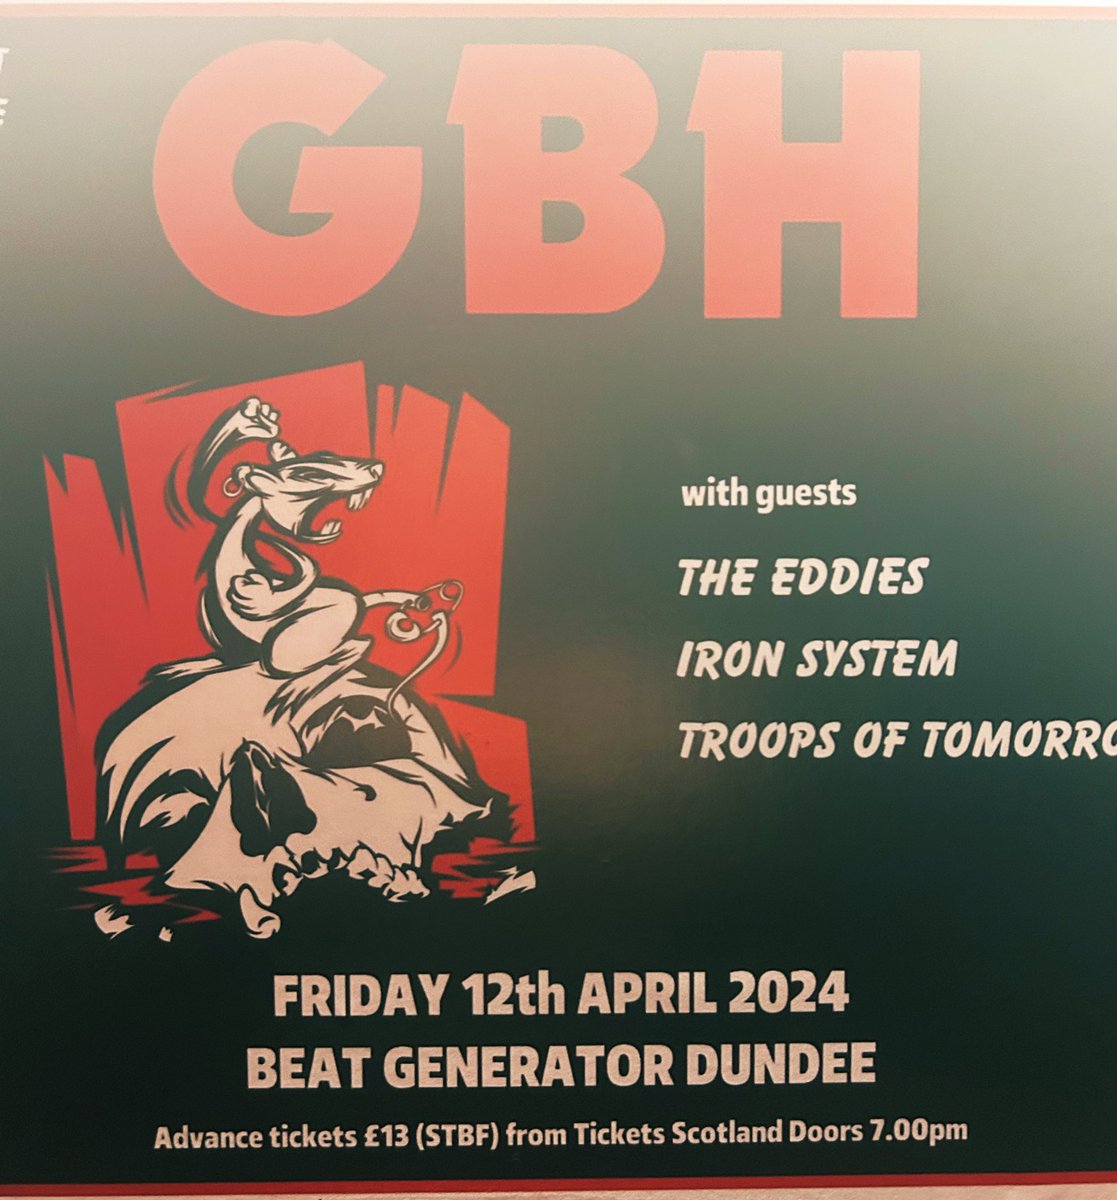 Tonight’s original live music entertainment with @gbhuk in Dundee at the best generator!